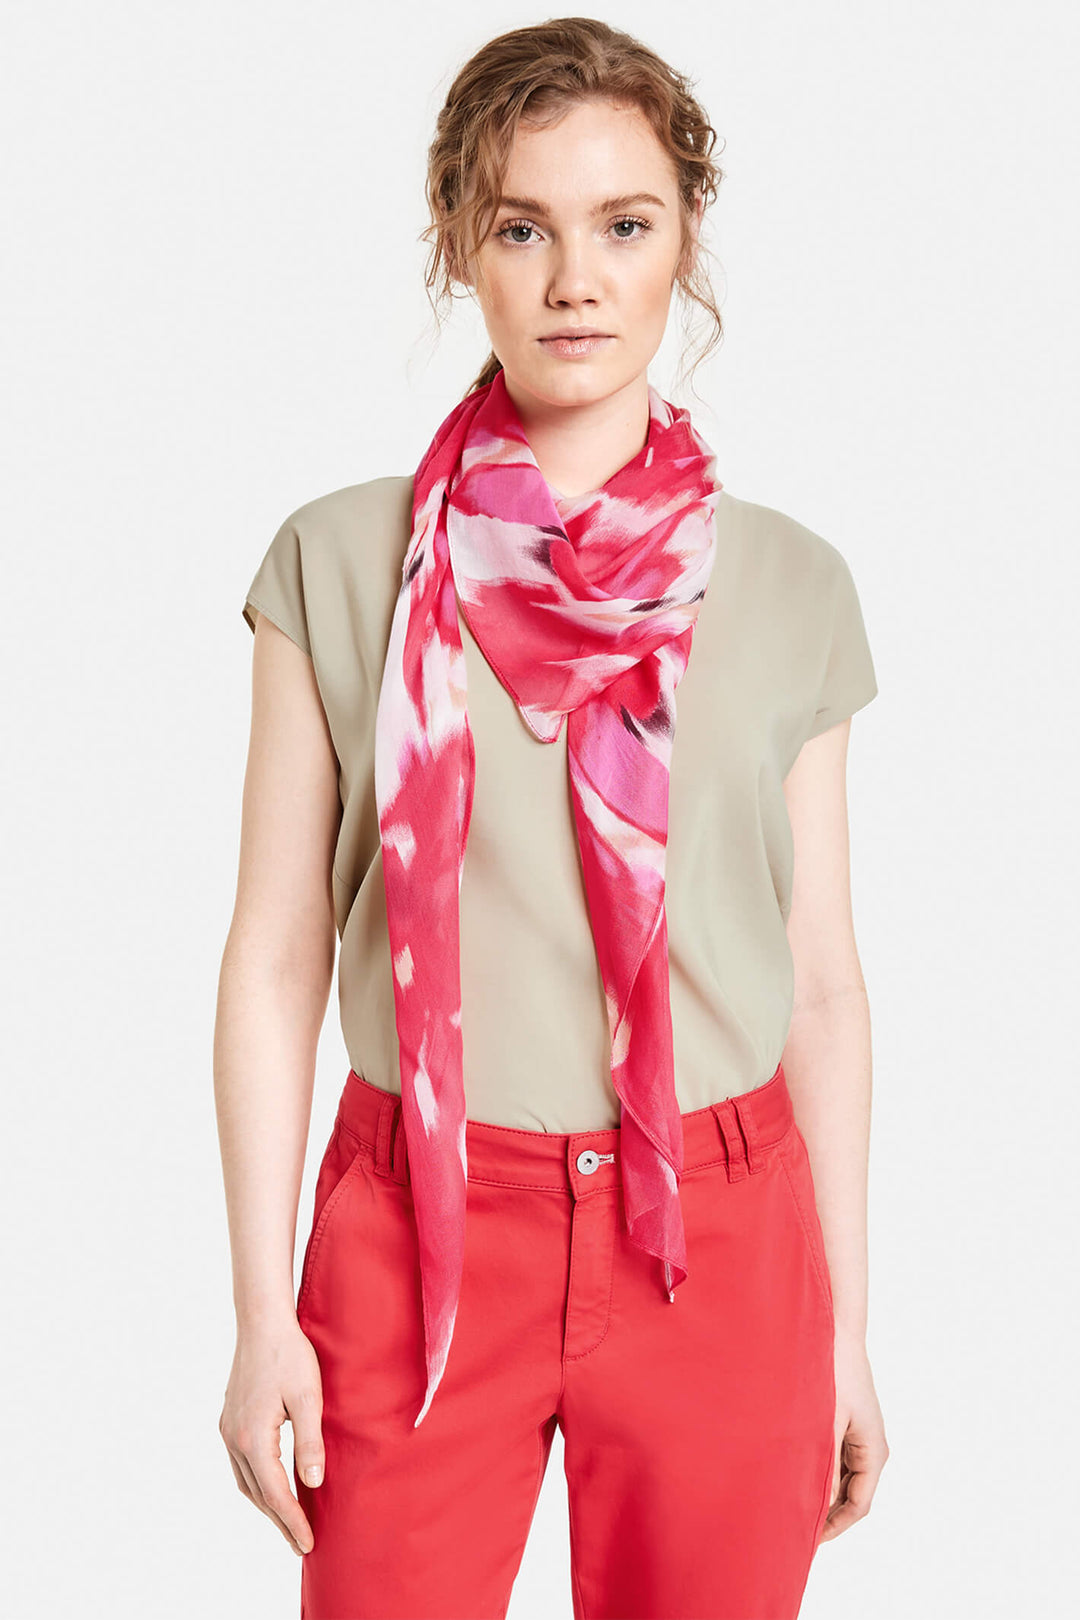 Taifun 300304 Hot Pink Abstract Floral Scarf - Experience Boutique